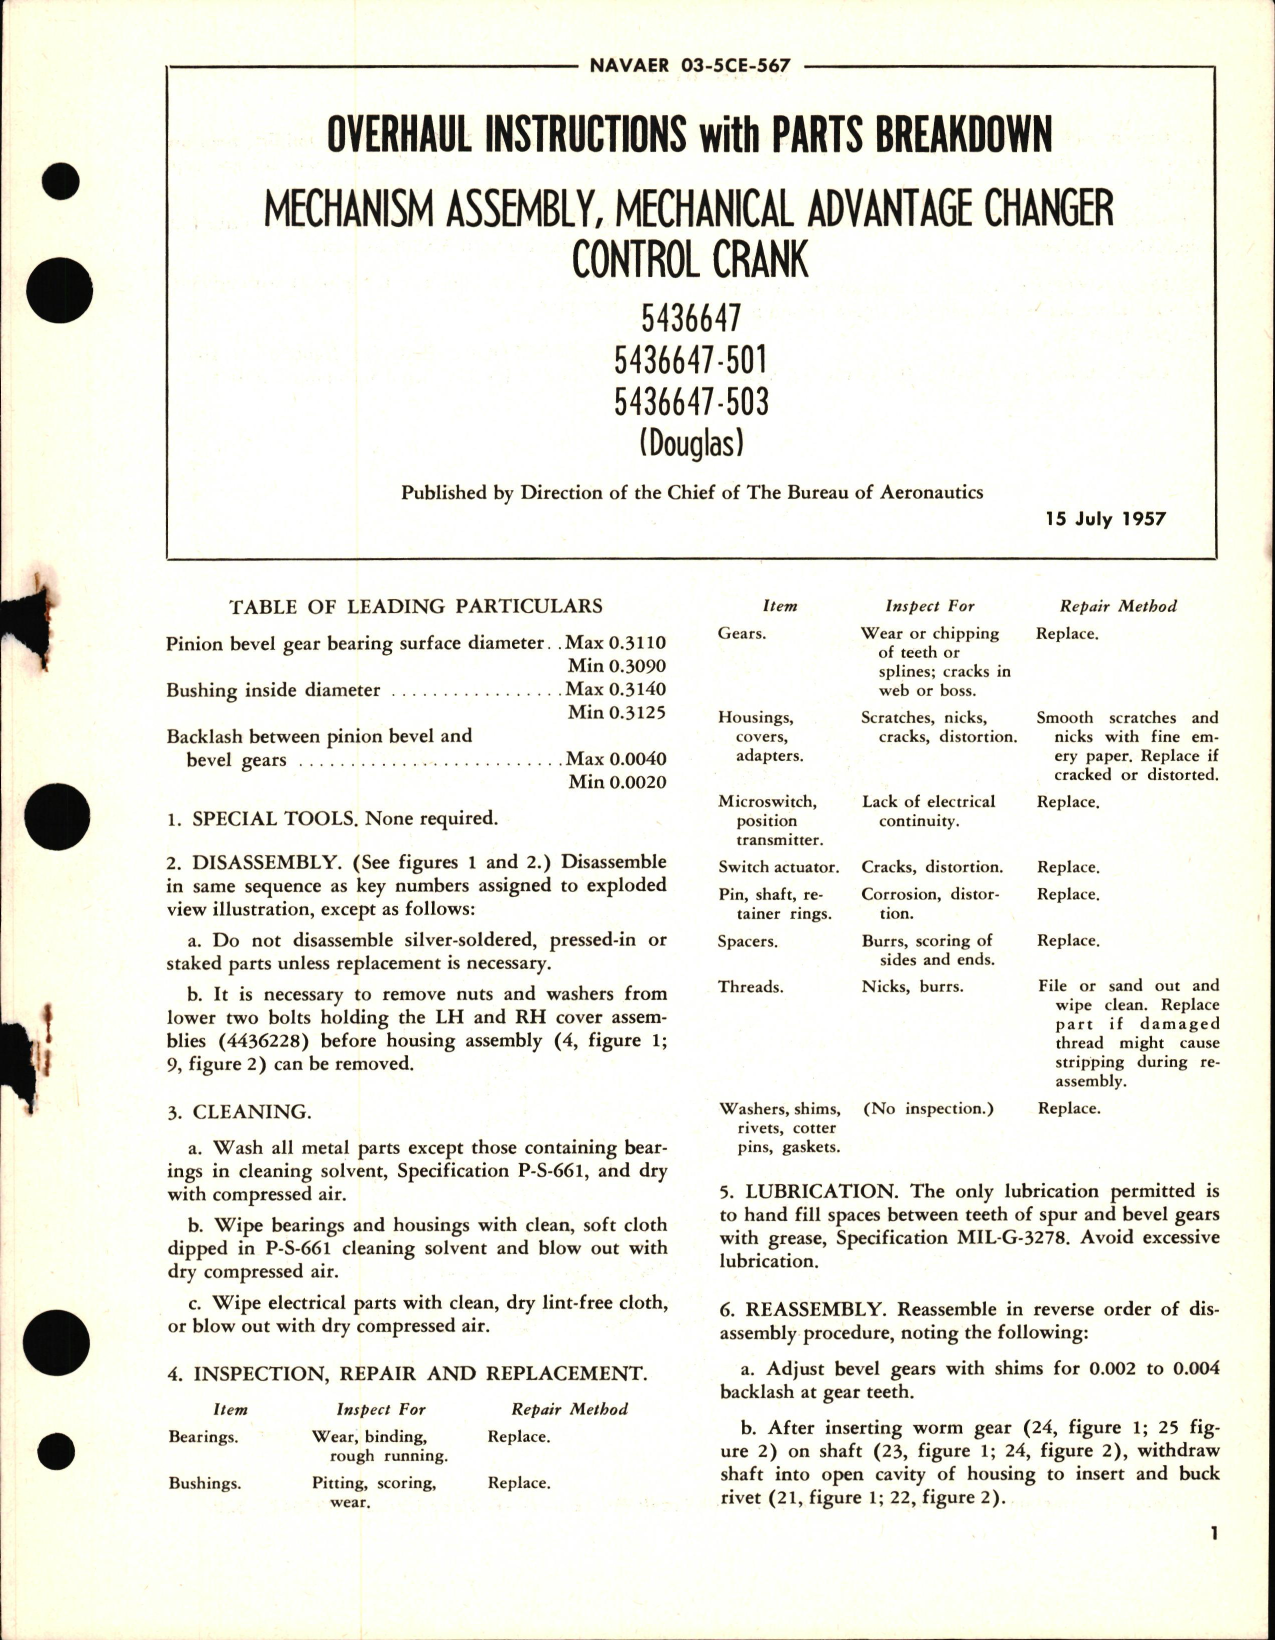 Sample page 1 from AirCorps Library document: Overhaul Instructions with Parts Breakdown for Mechanism Assembly, Mechanical Advantage Changer Control Crank 5436647, 5436647-501 and 5436647-503 